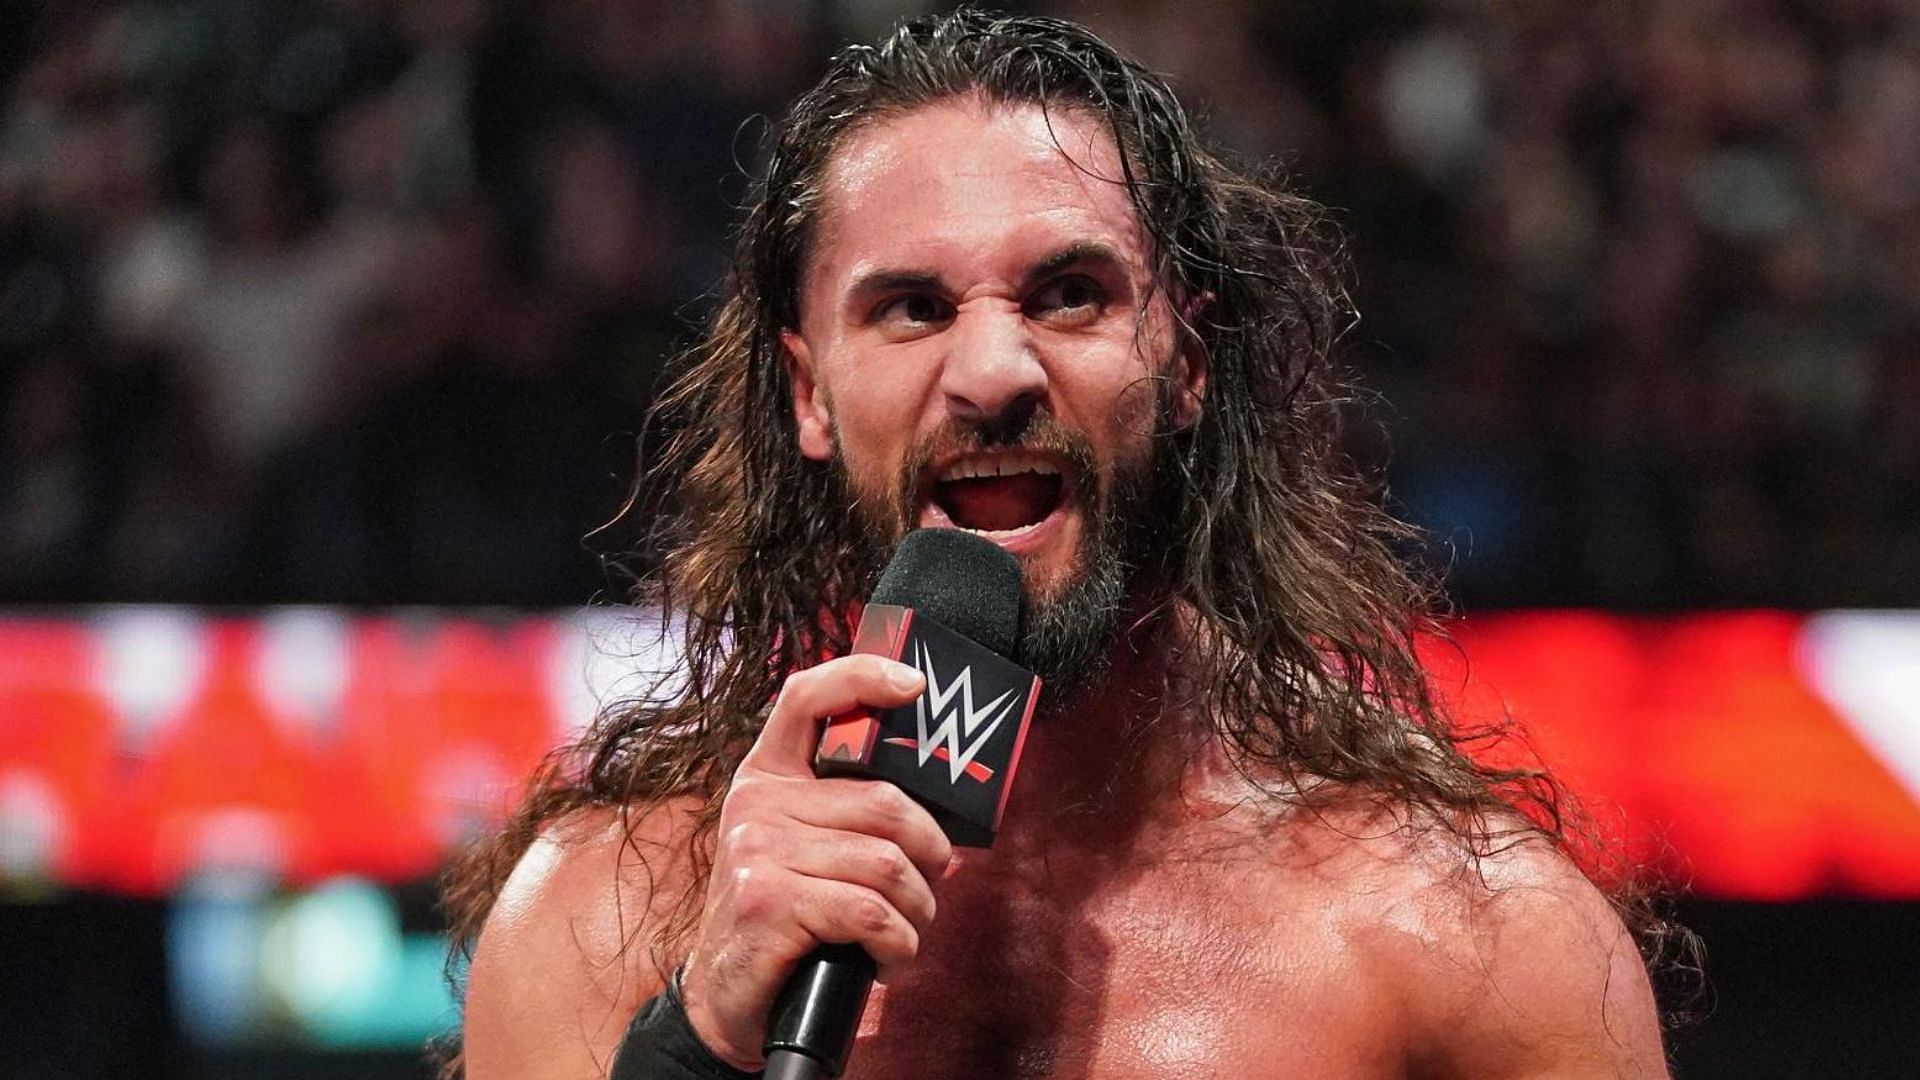 Seth Rollins cutting a promo during a recent episode of WWE RAW